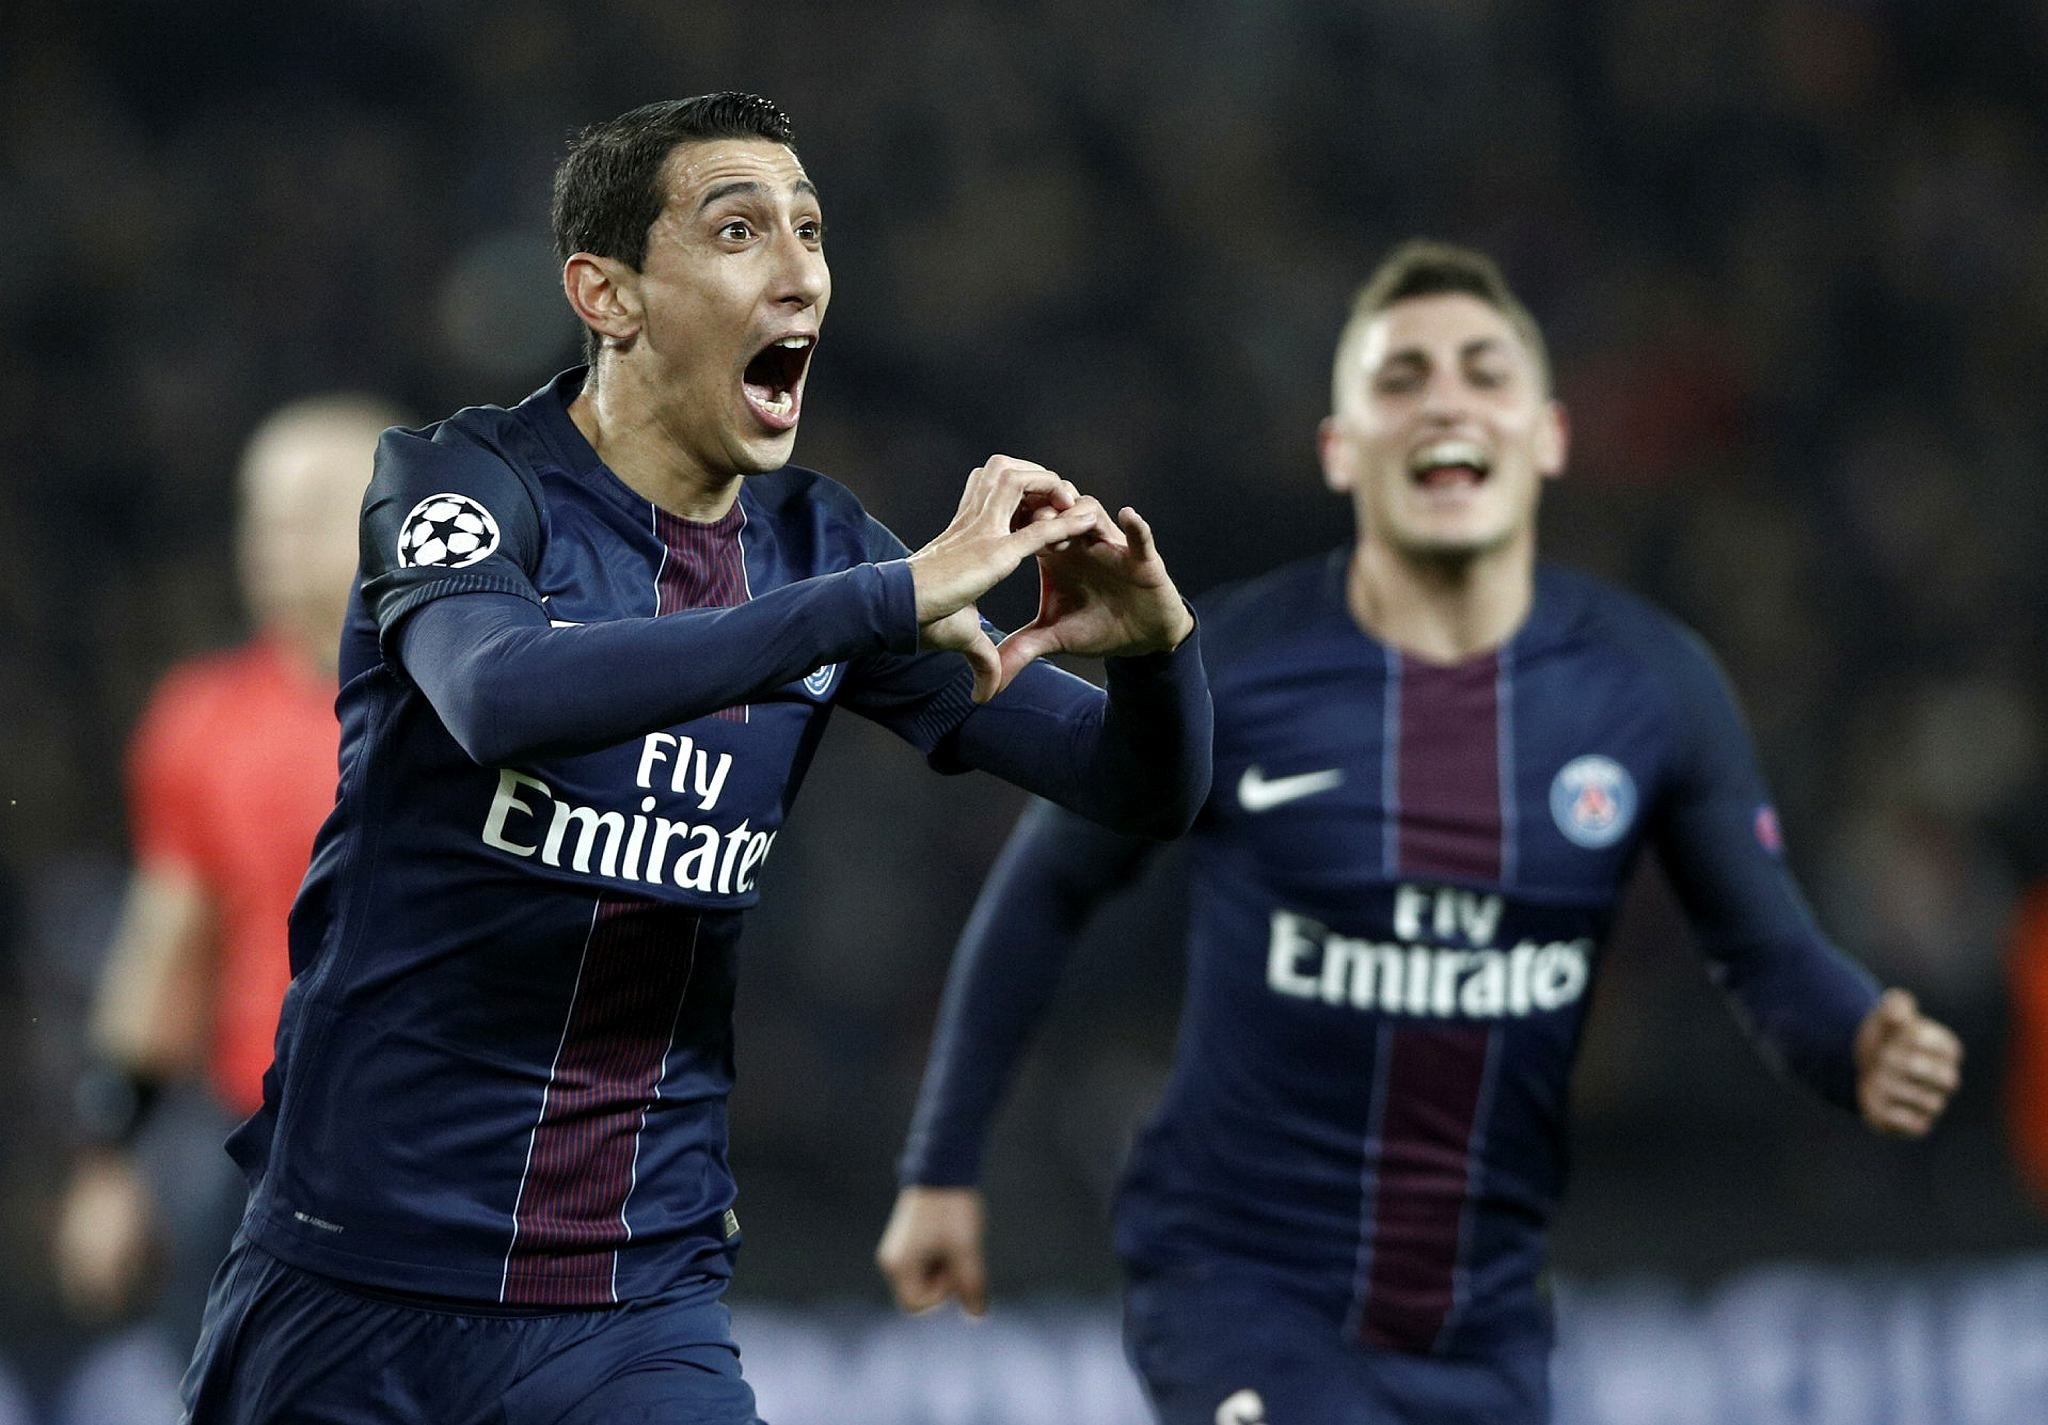 PSG's Angel Di Maria (L) celebrates after scoring the 1-0 lead during the UEFA Champions League round of 16 first leg soccer match between Paris Saint Germain and FC Barcelona at the Parc des Princes Stadium, in Paris, France (EPA Photo)